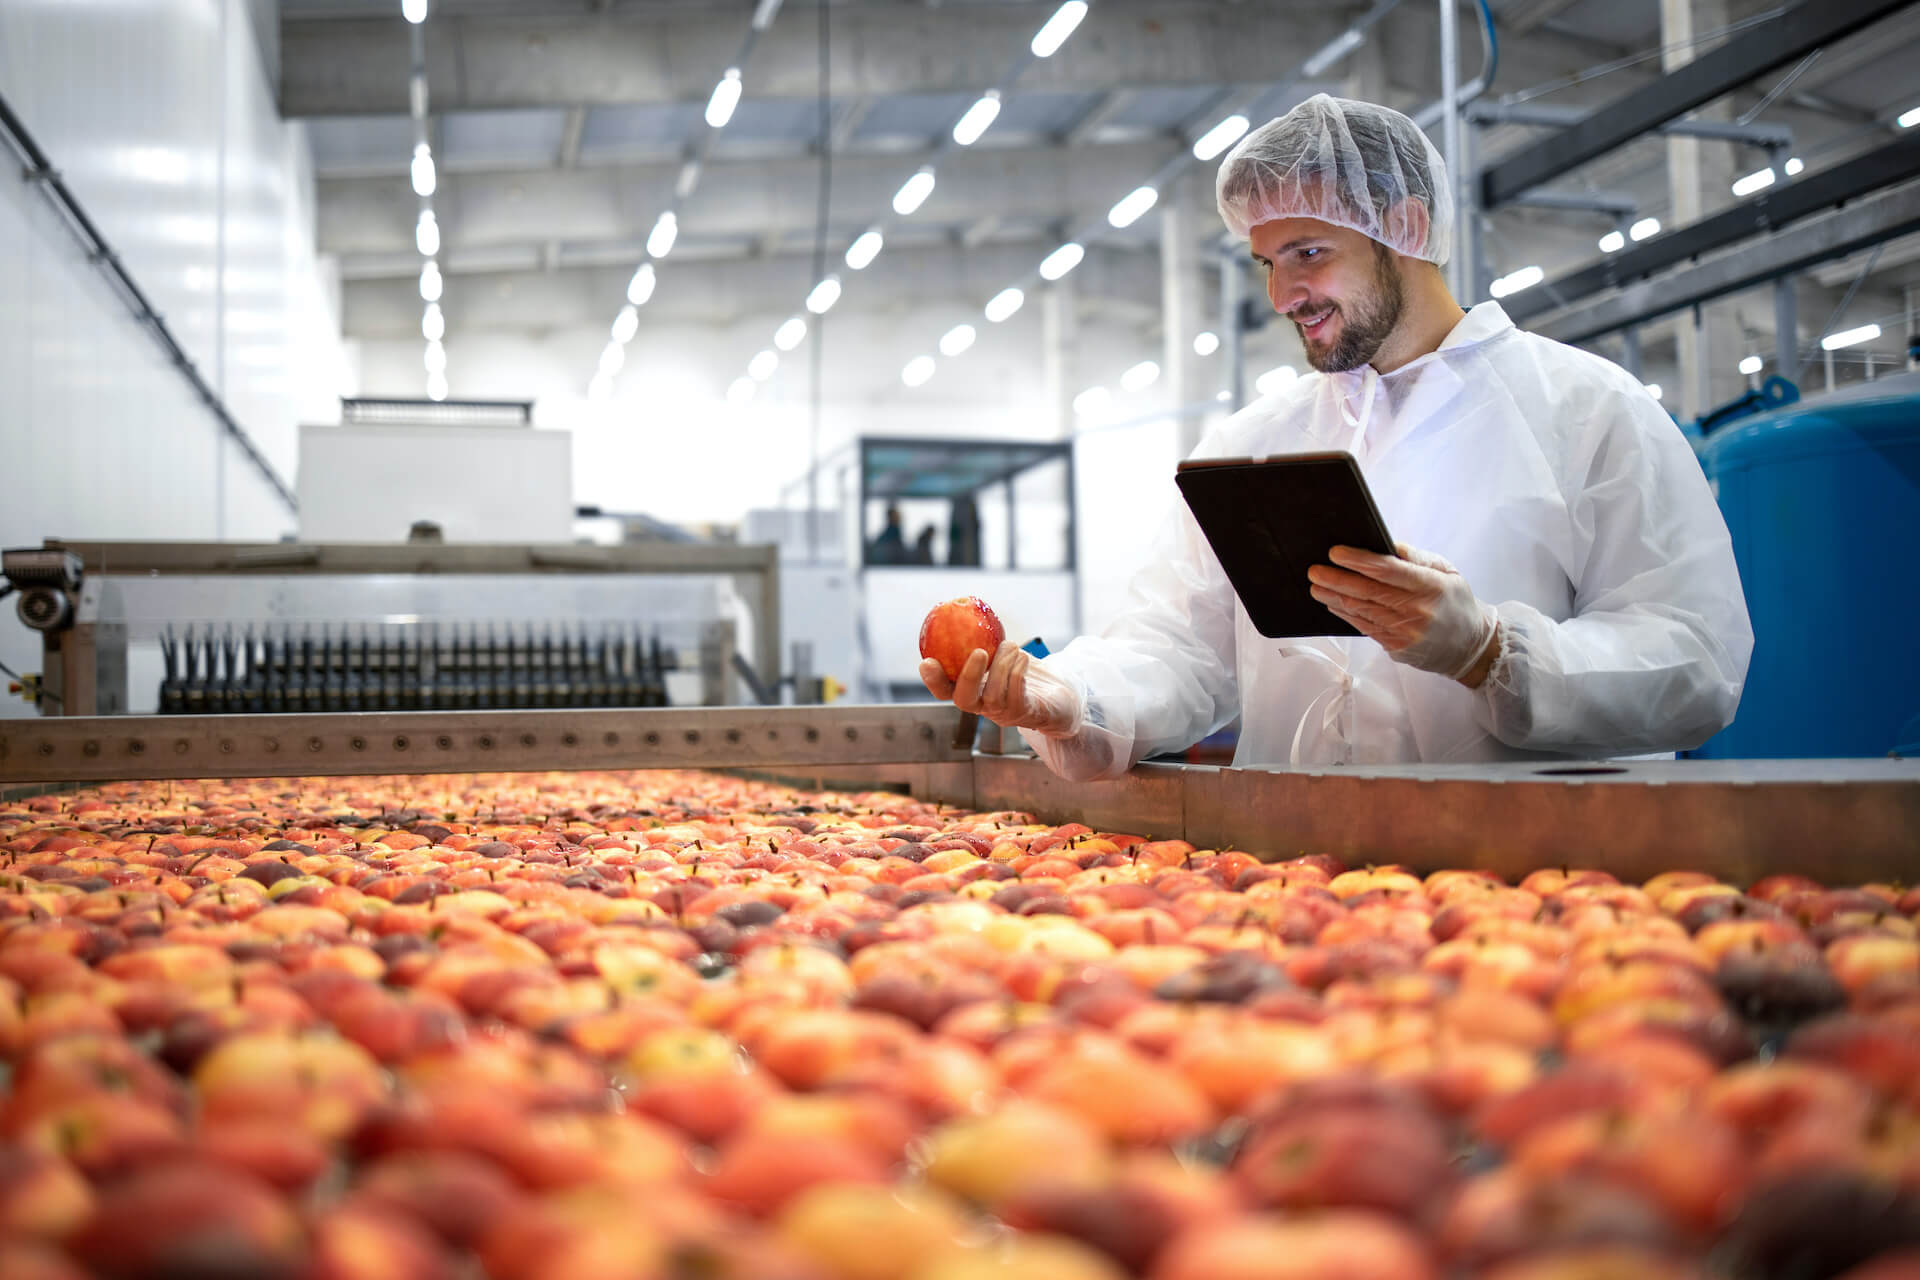 Fruit on conveyer belt being examined for sorting and quality control